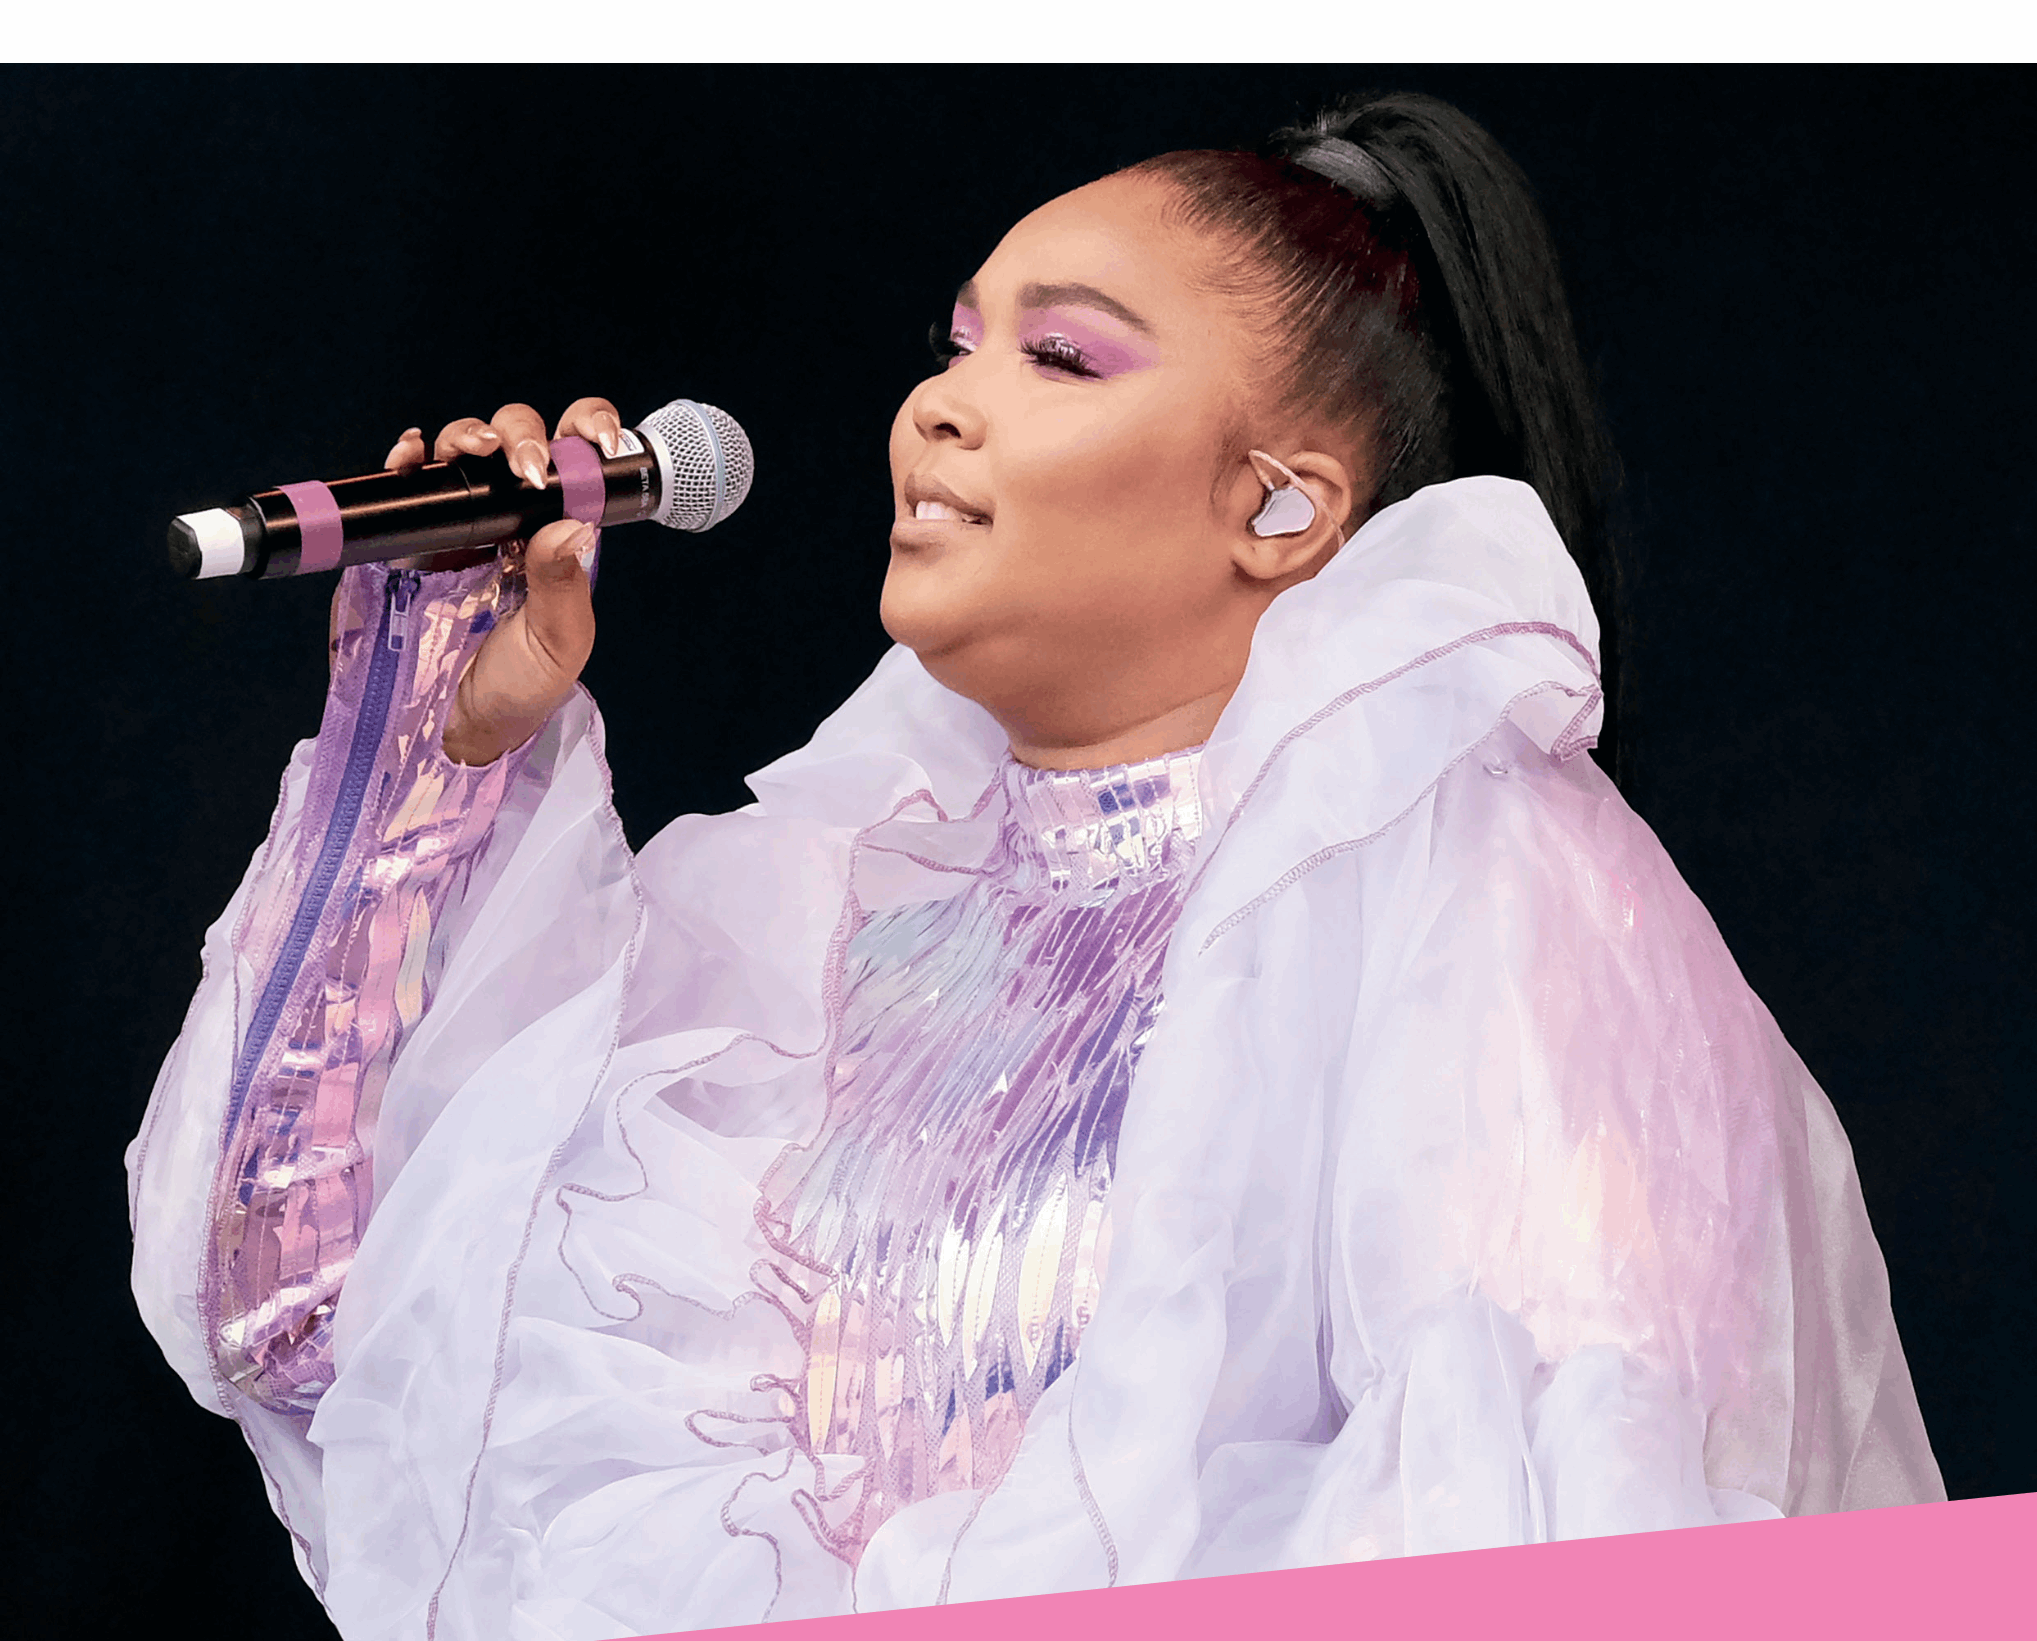 Lizzo performing at the Glastonbury Festival in 2019 When Melissa was 9 - photo 3